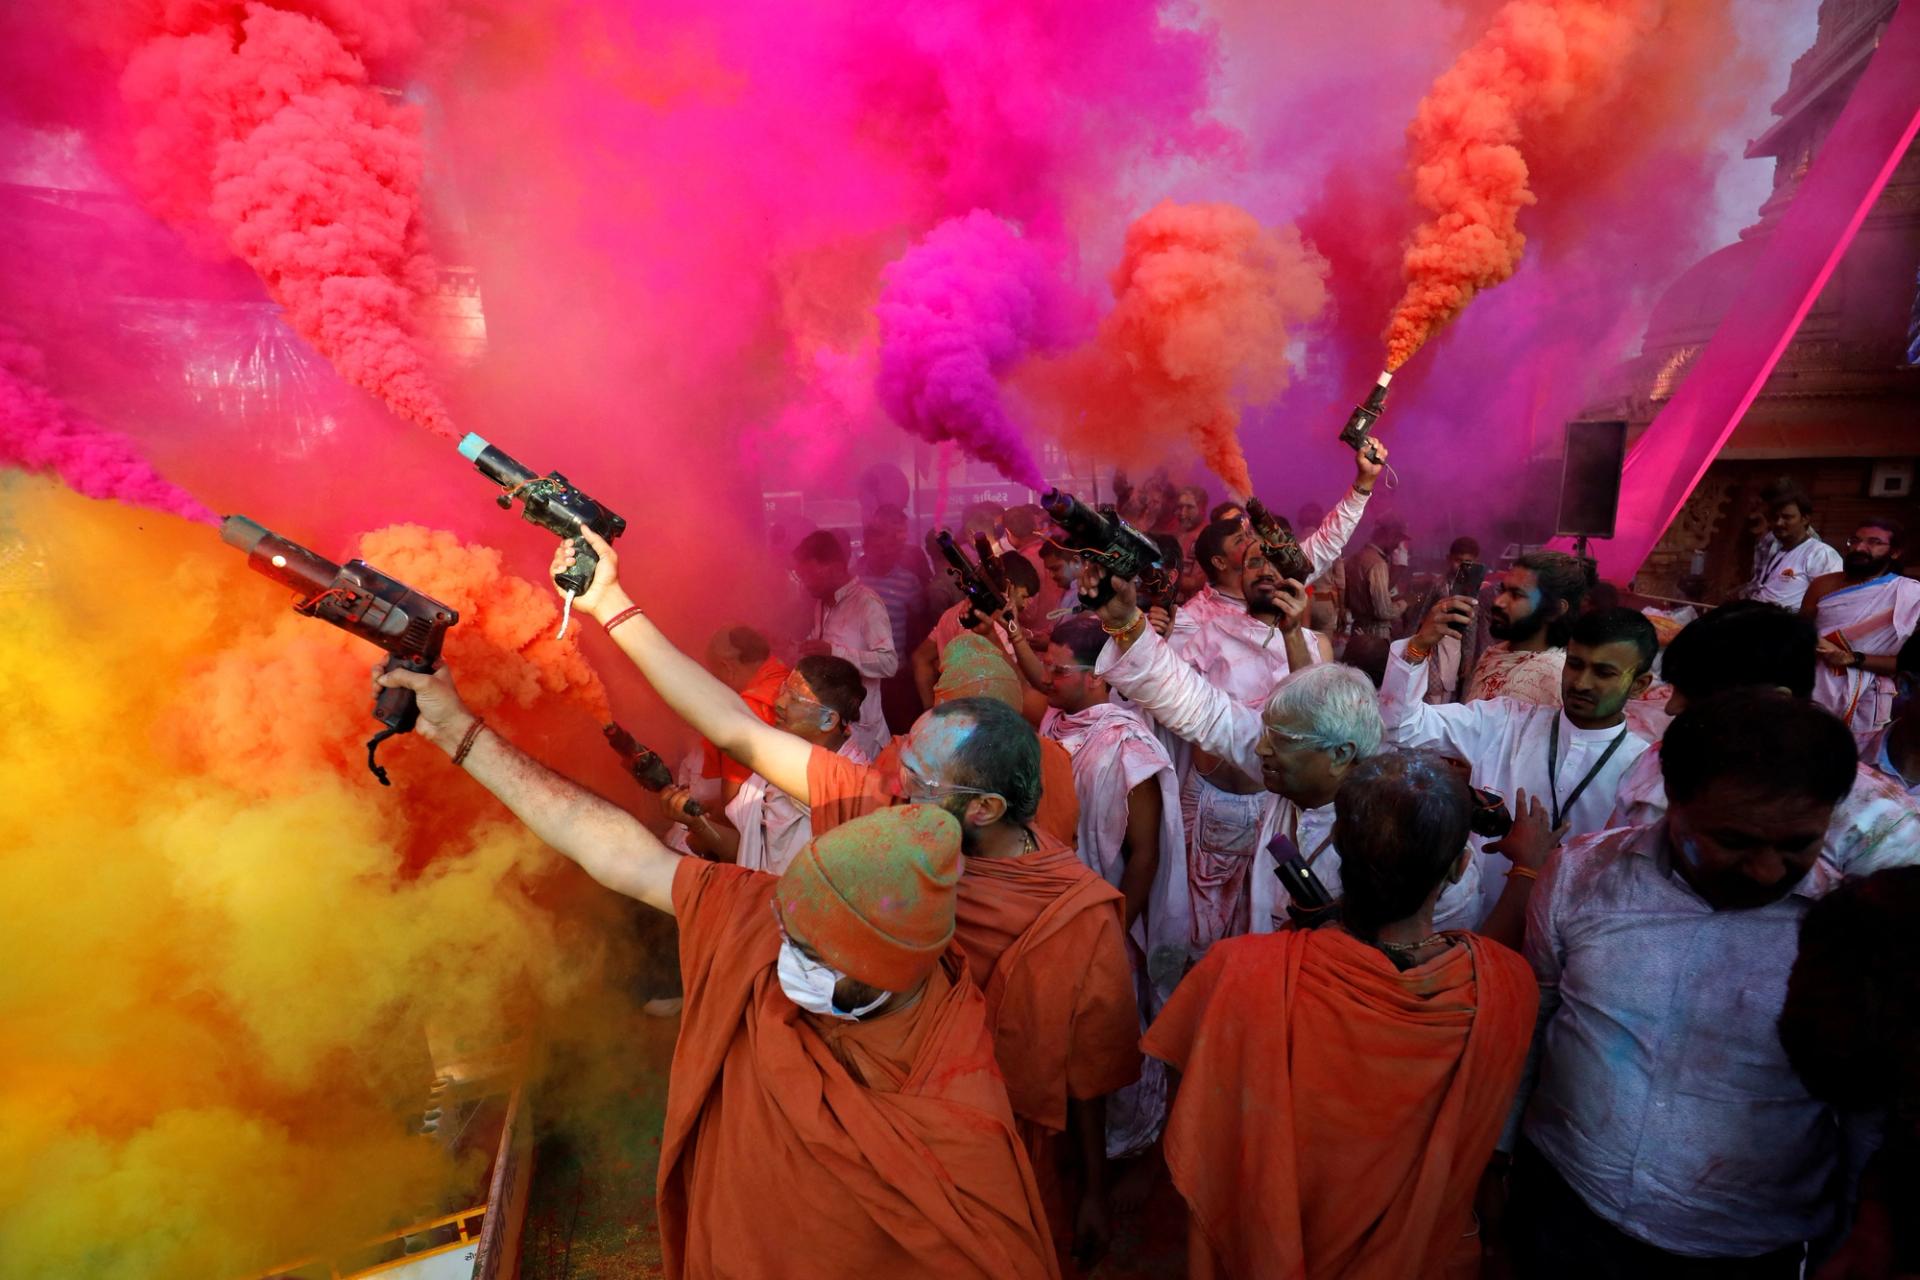 Hindu priests use colour smoke guns to celebrate Holi, the festival of colours, at a temple premises in Salangpur, in the western state of Gujarat, India, March 7, 2023. REUTERS/Amit Dave